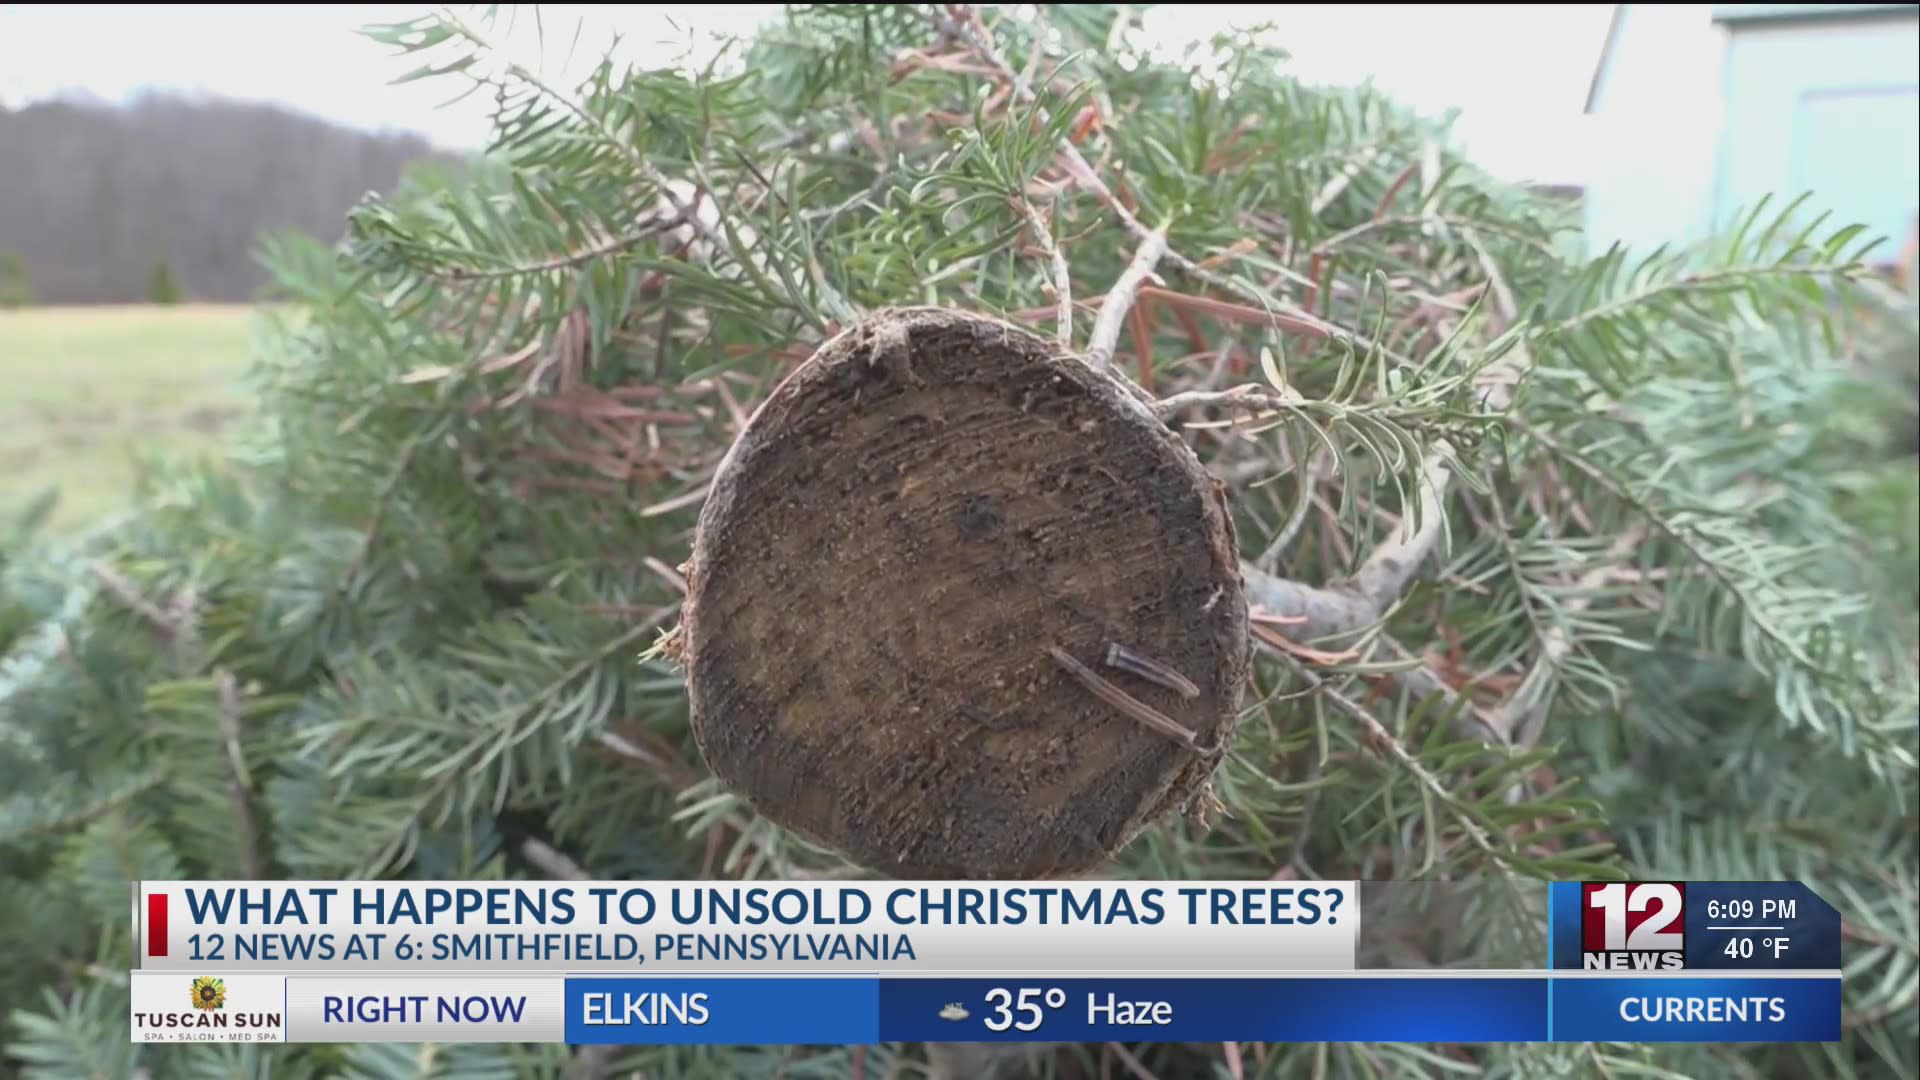 Here's when to take down your Christmas tree, according to tradition